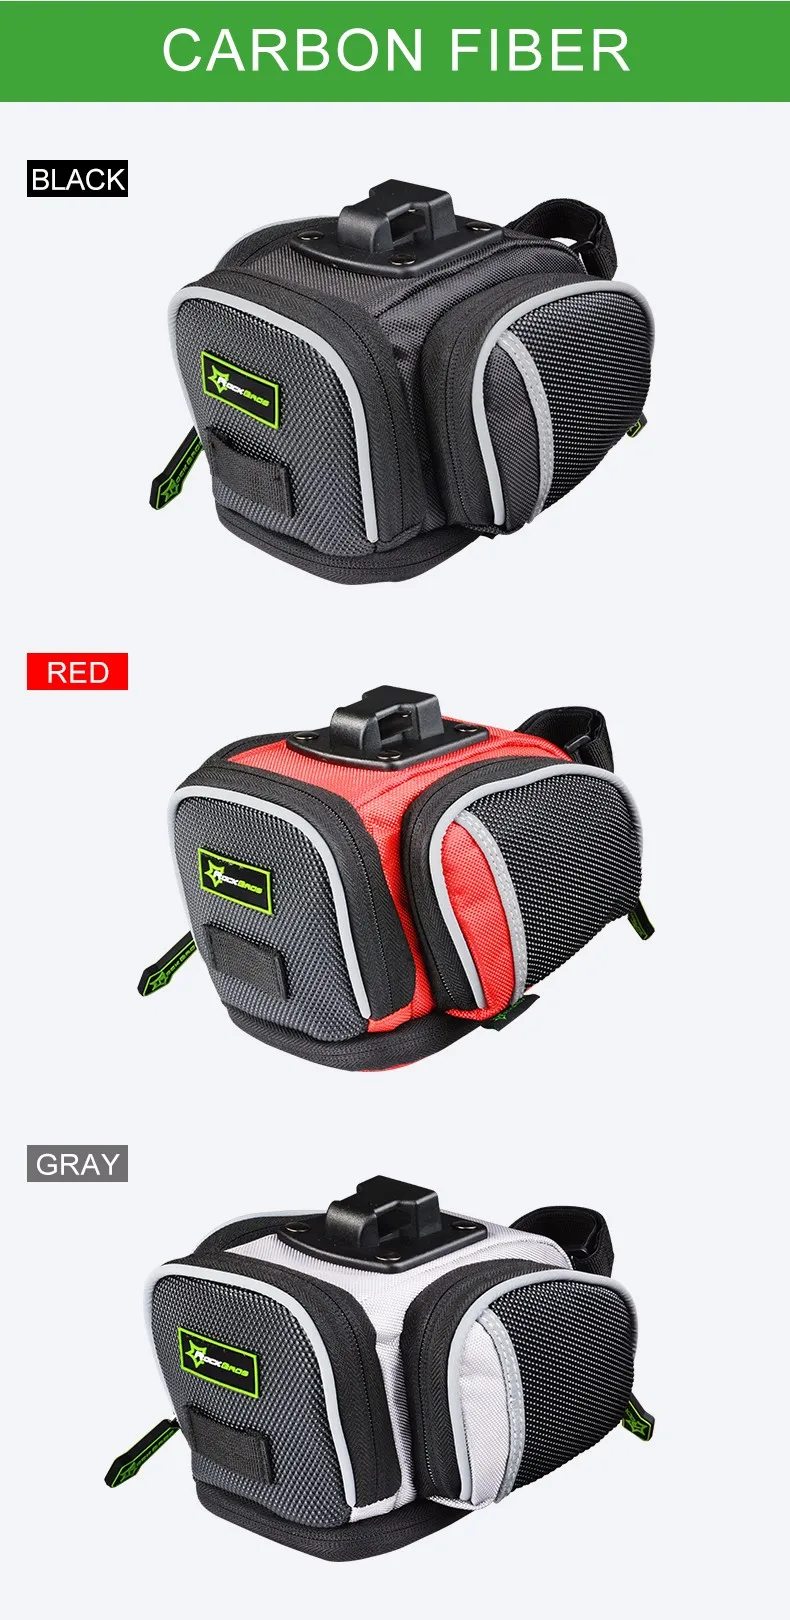 Clearance ROCKBROS Cycling Saddle Bags Mountain Road Bike MTB Seat Post Bag Fixed Gear Fixie Cycle Rear Bags Bicycle Accessories 3 Colors 4